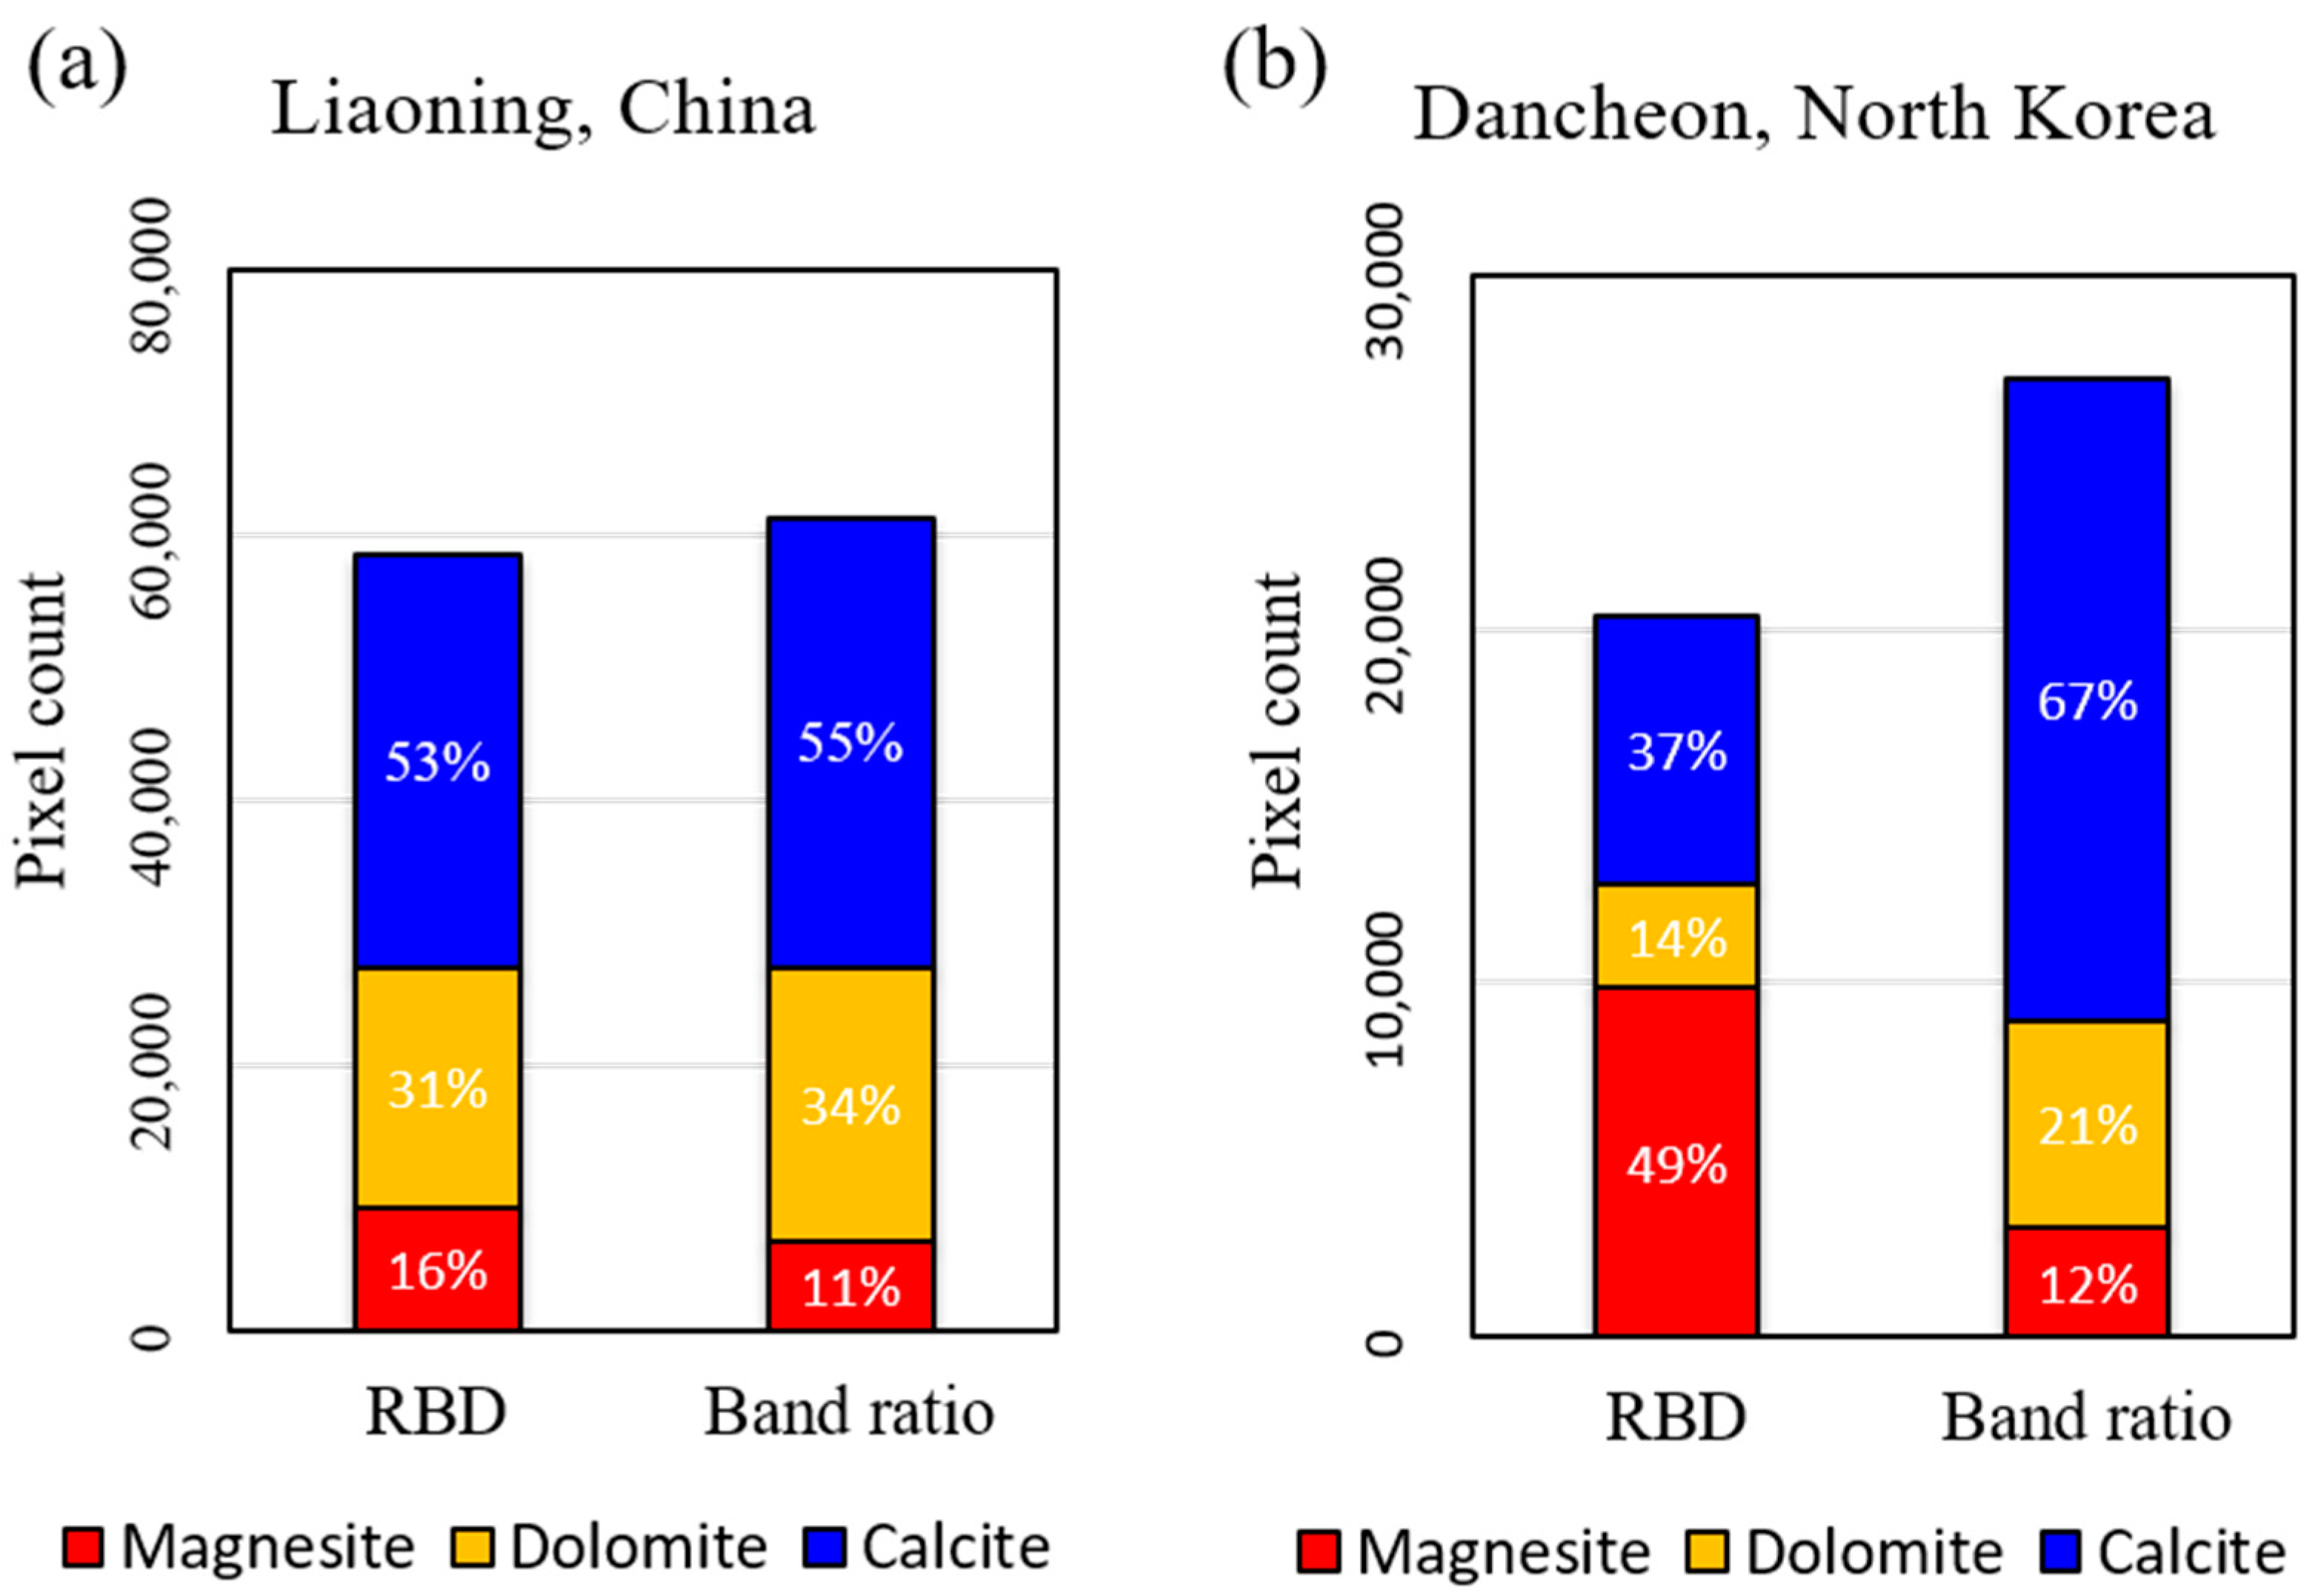 Remote Sensing | Free Full-Text | Application of ASTER Data for  Differentiating Carbonate Minerals and Evaluating MgO Content of Magnesite  in the Jiao-Liao-Ji Belt, North China Craton | HTML